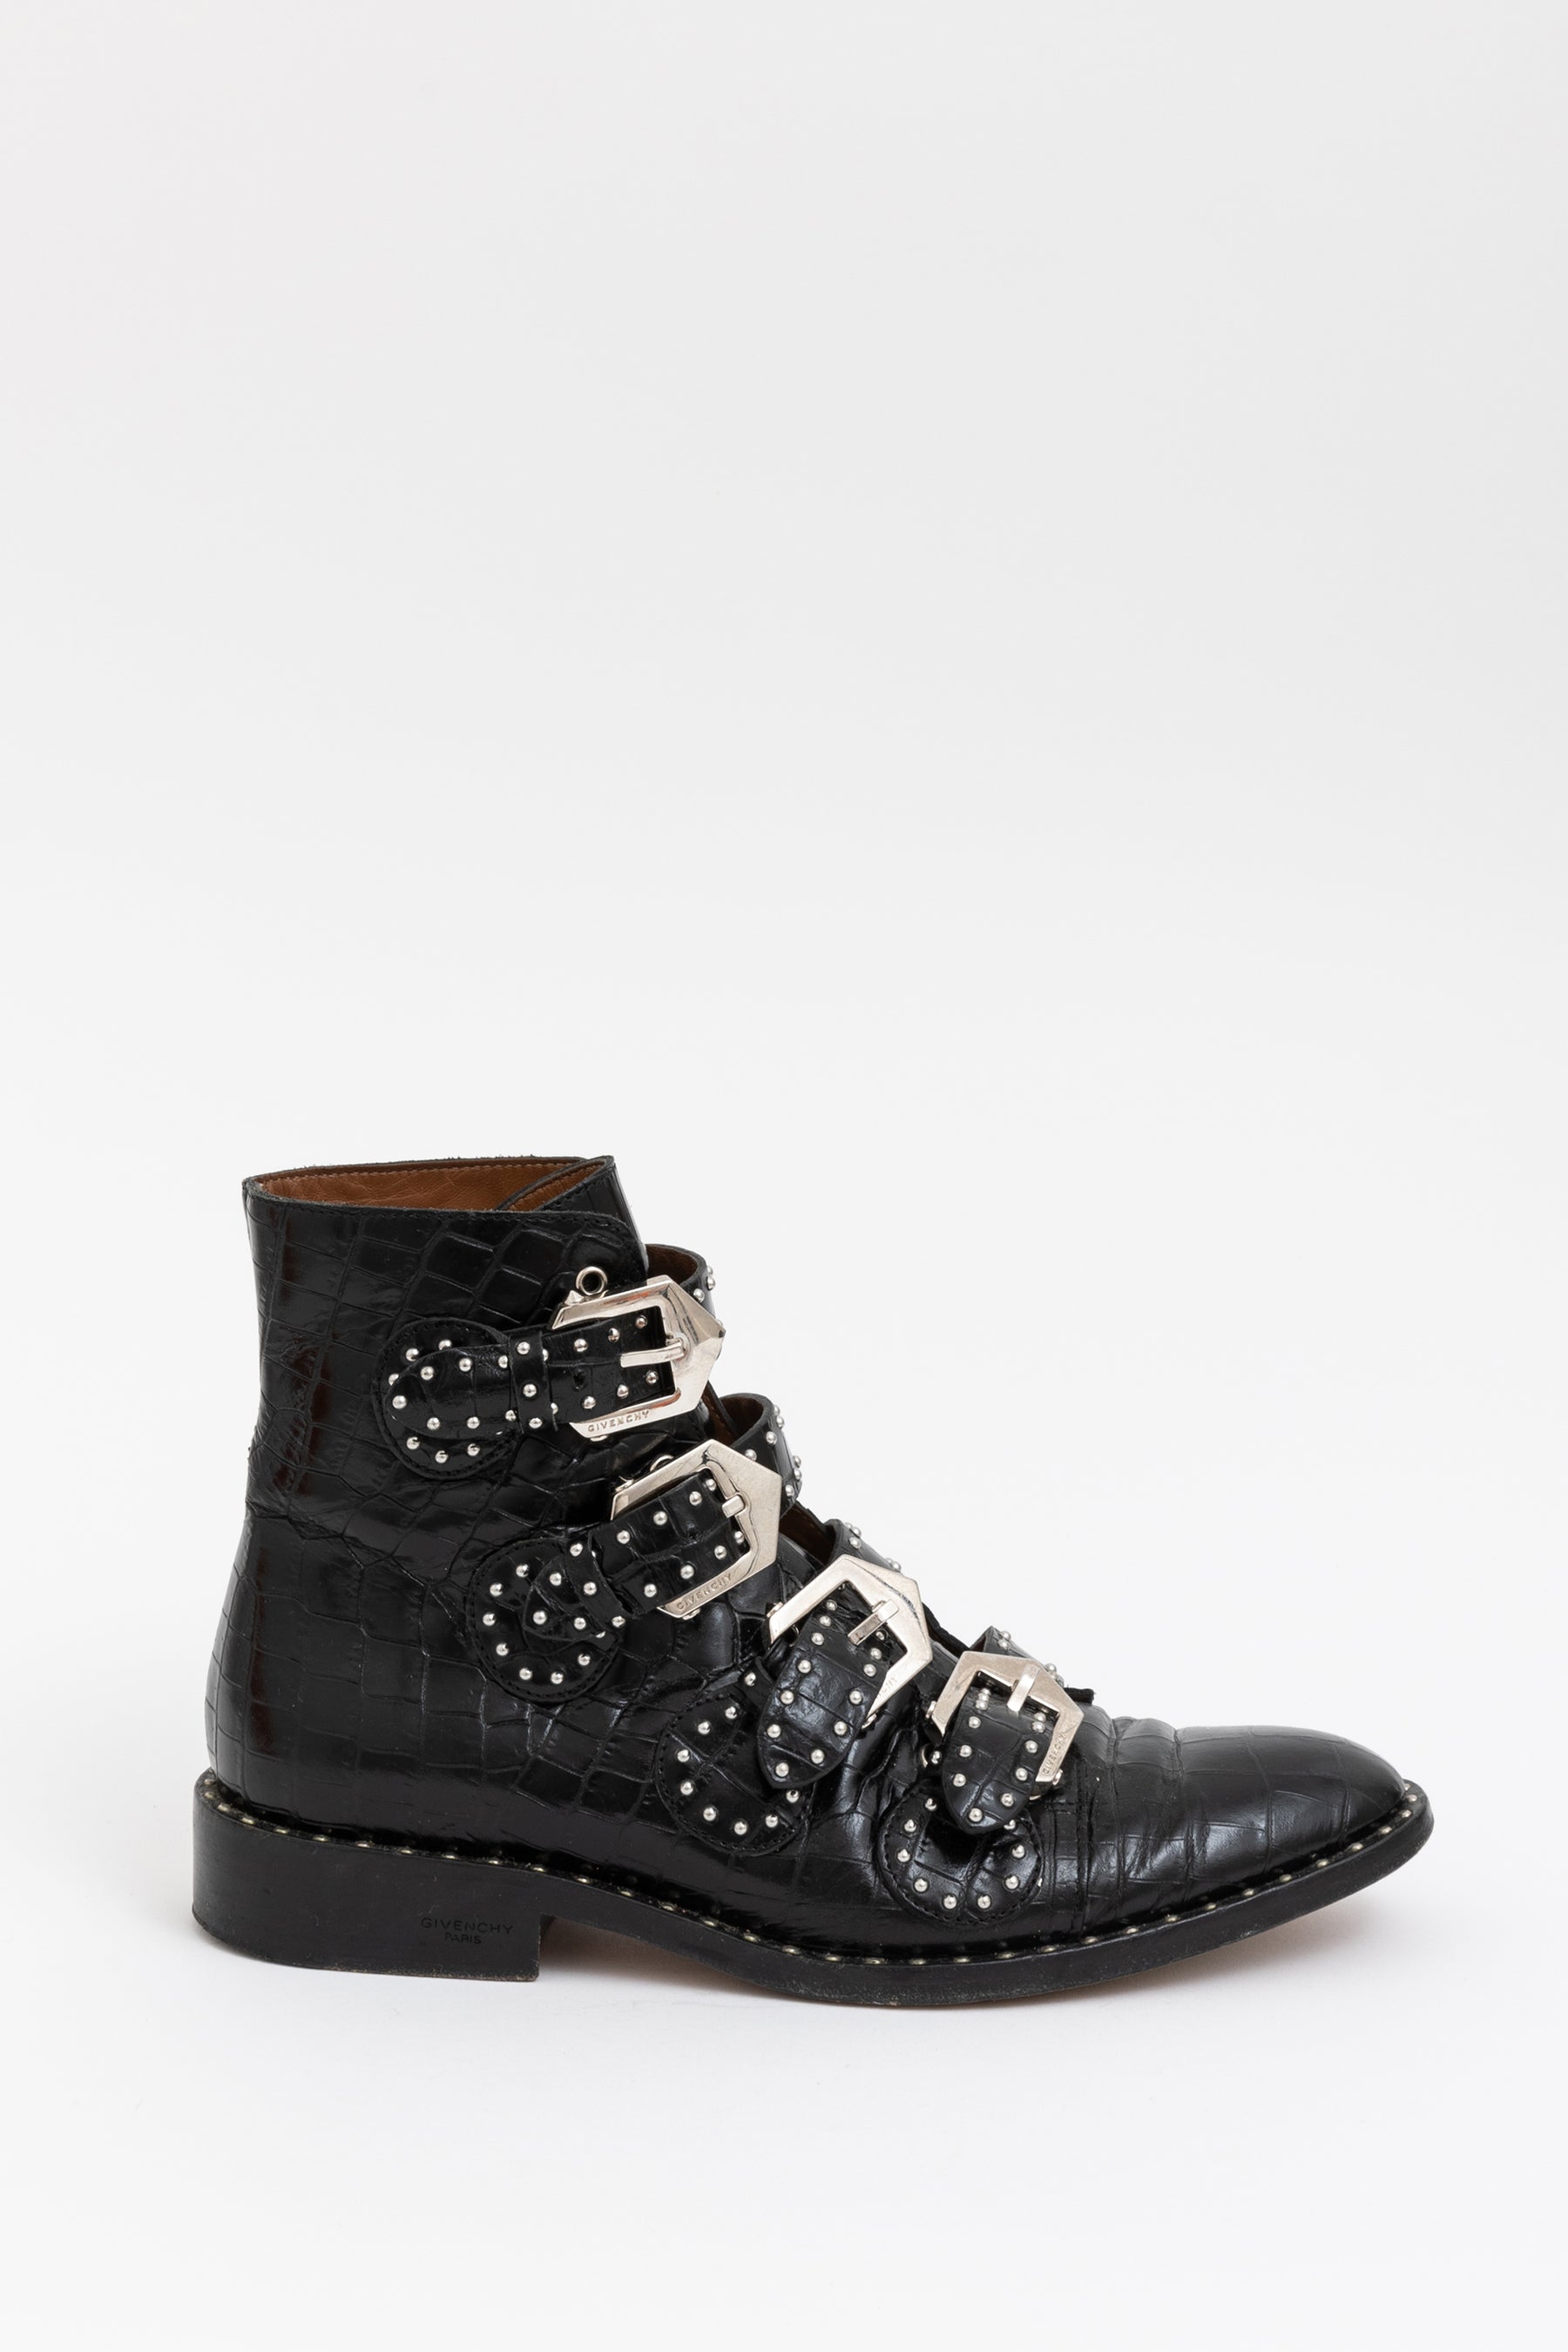 Croc Embossed Studded Boots